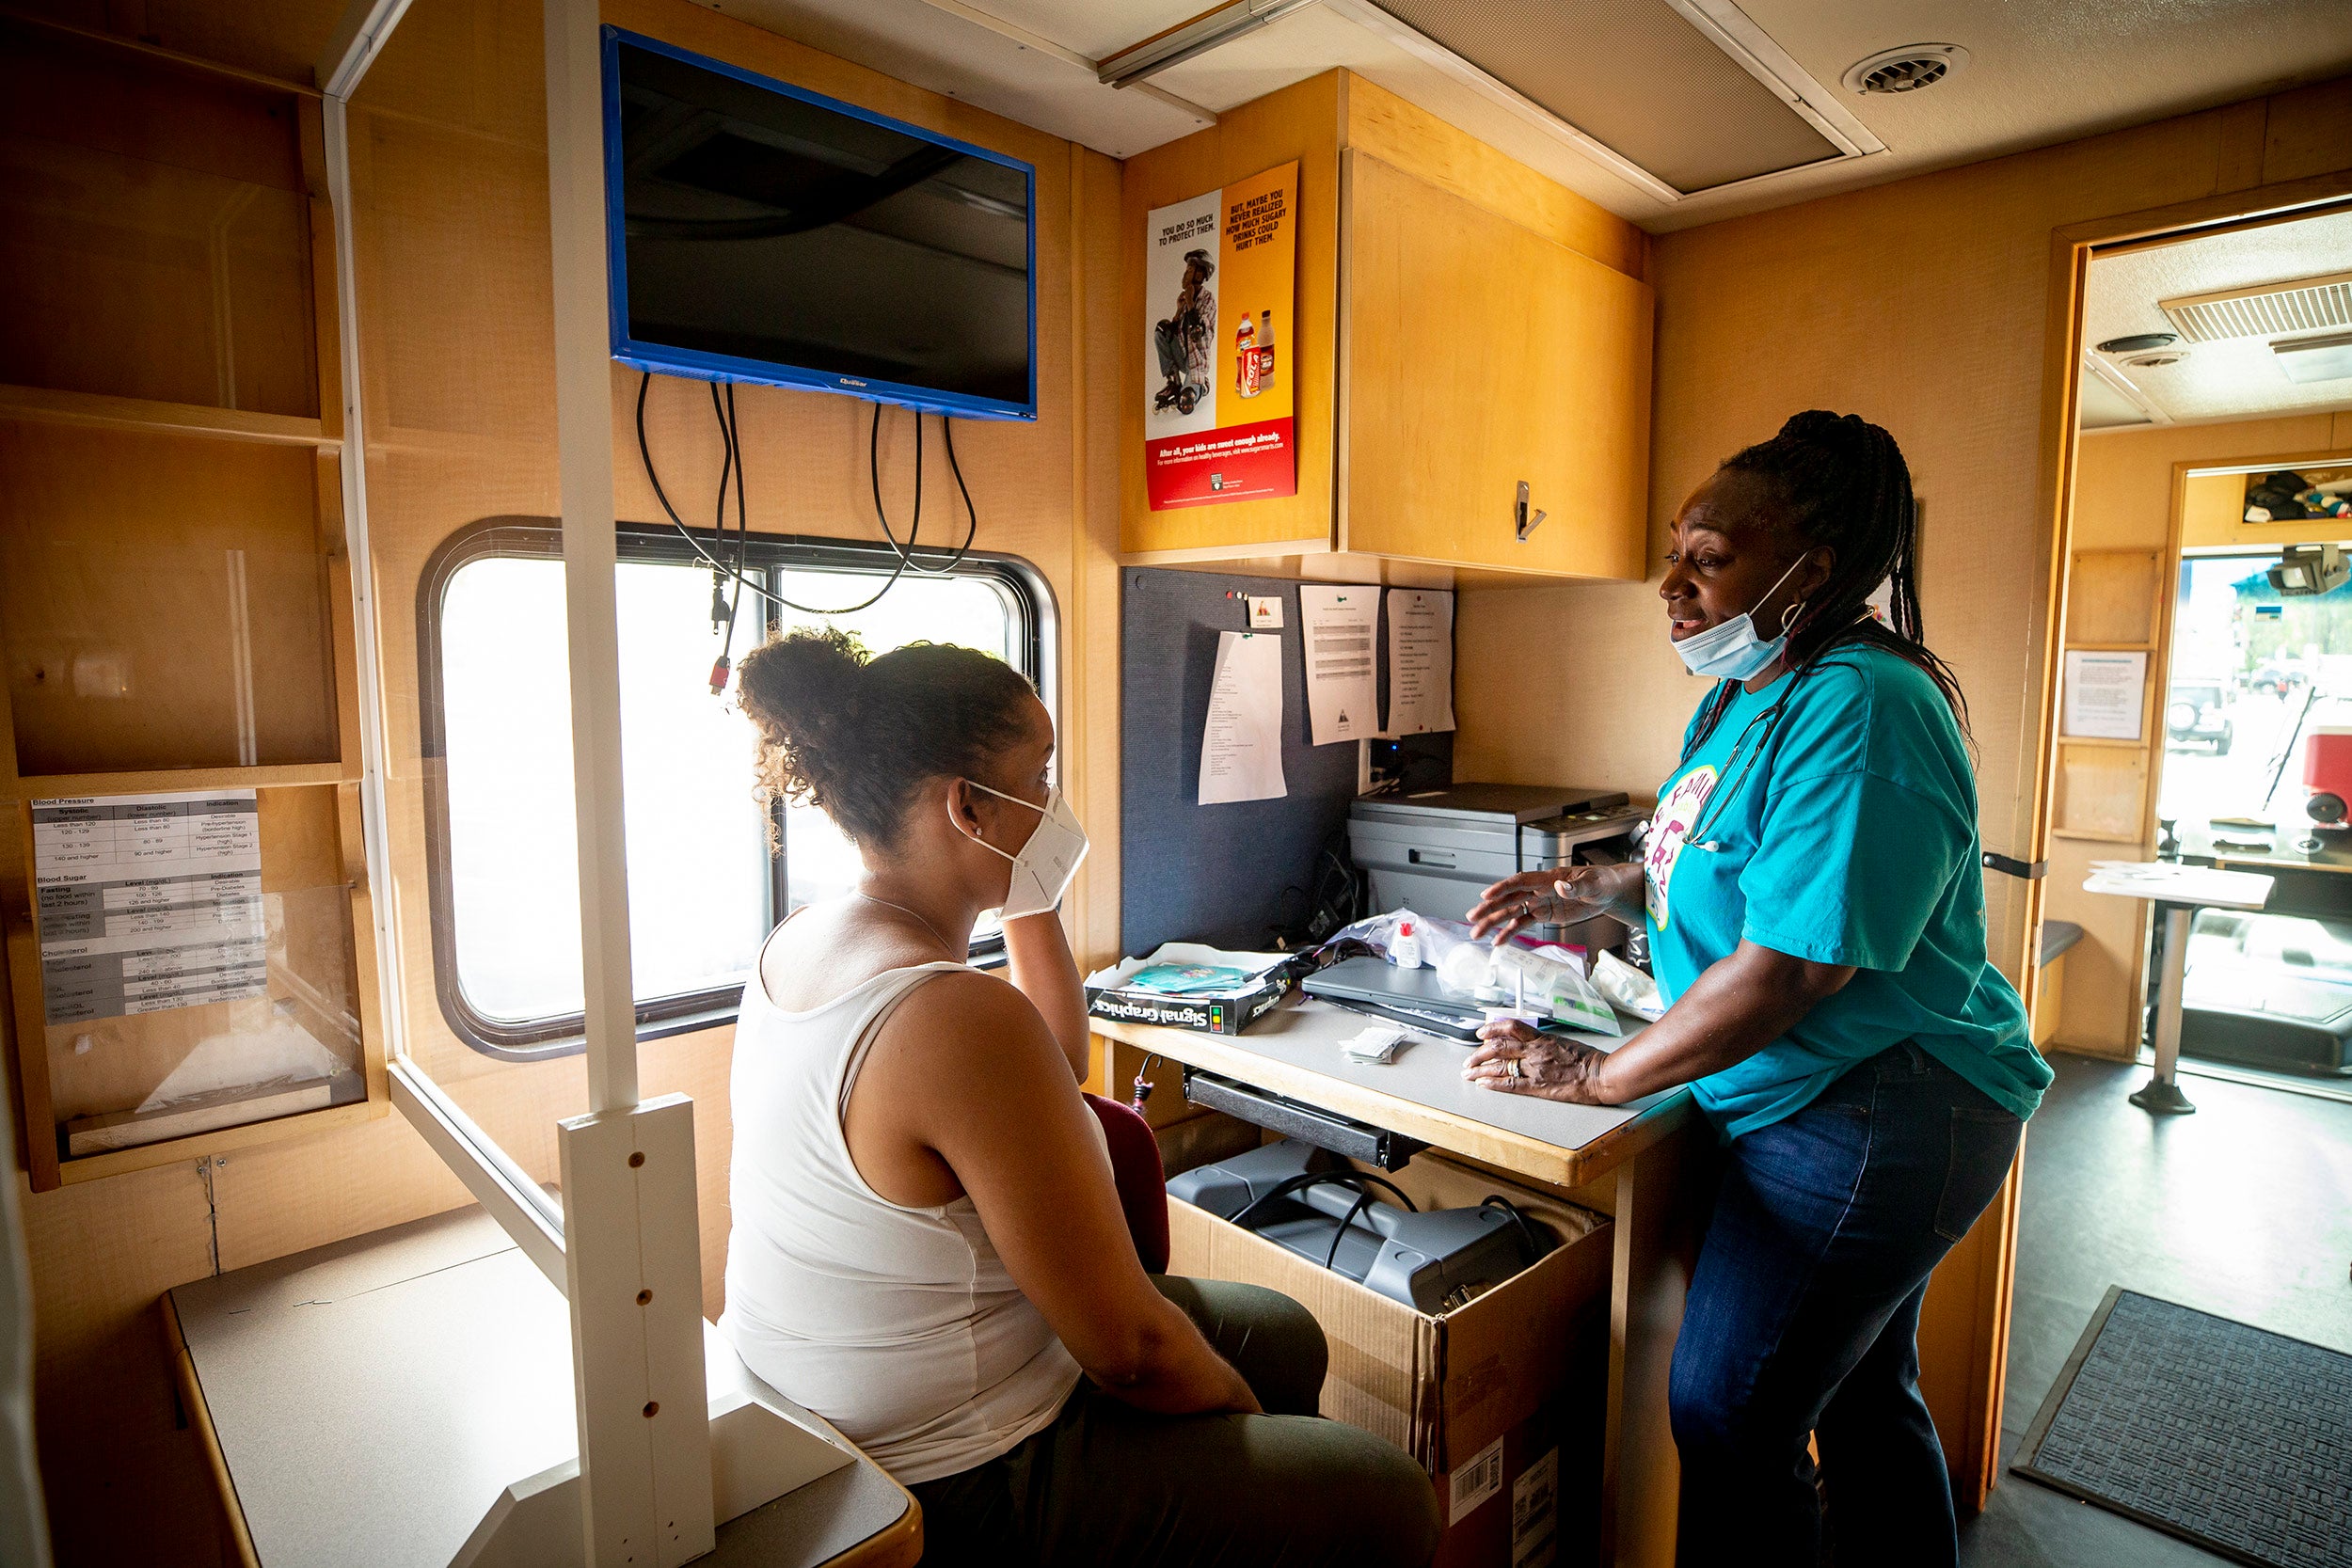 Rainelle Walker White, right, assistant director, while eating her lunch, chats with staffer Joanne Suarez inside Harvard University's Family Van.